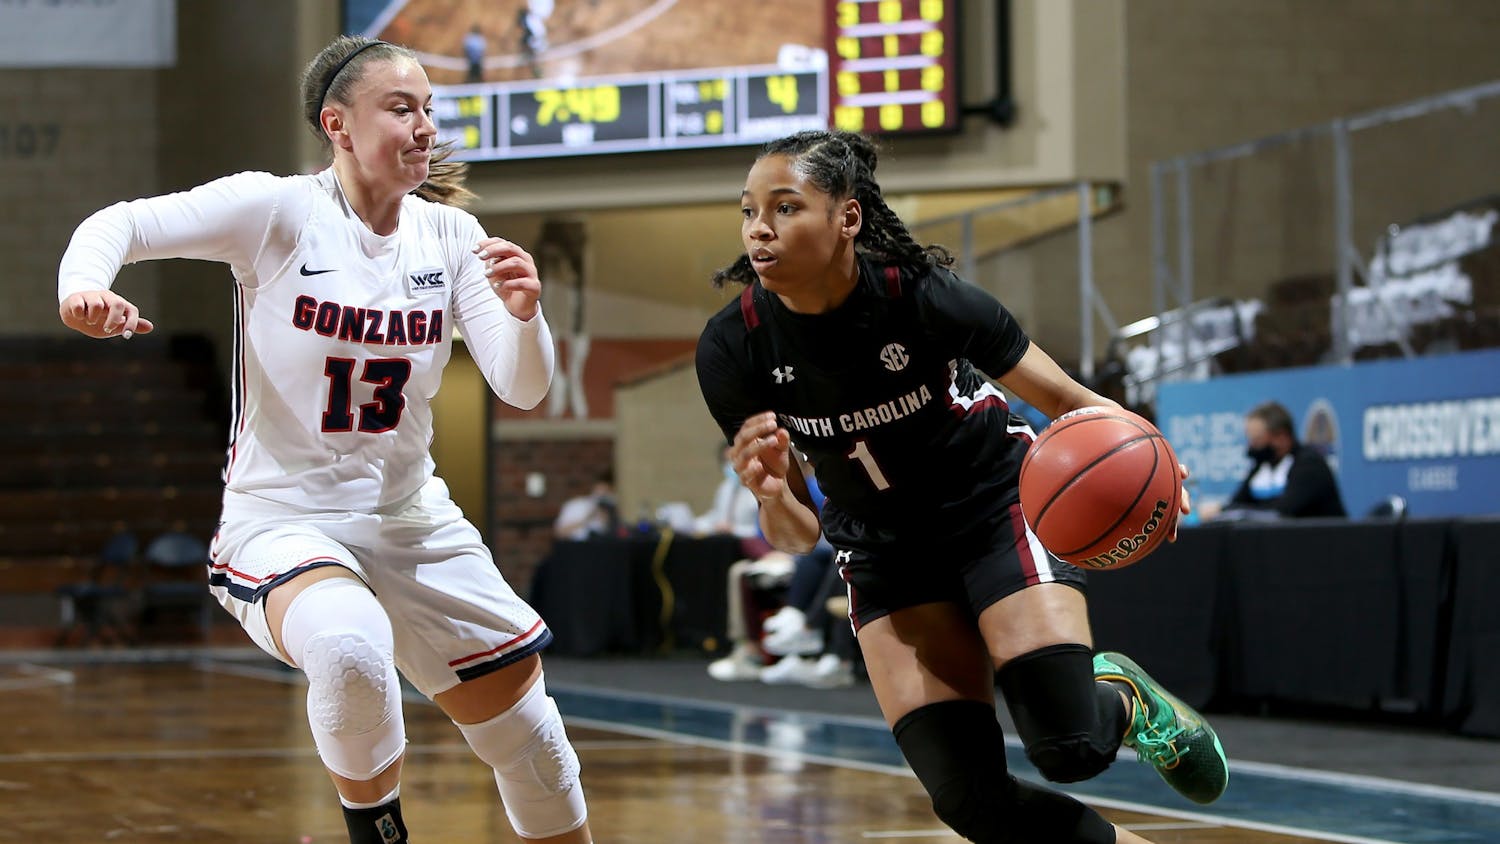 Sophomore guard Zia Cooke dribbles the ball around a Gonzaga defender. The Gamecocks won the game 79-72.